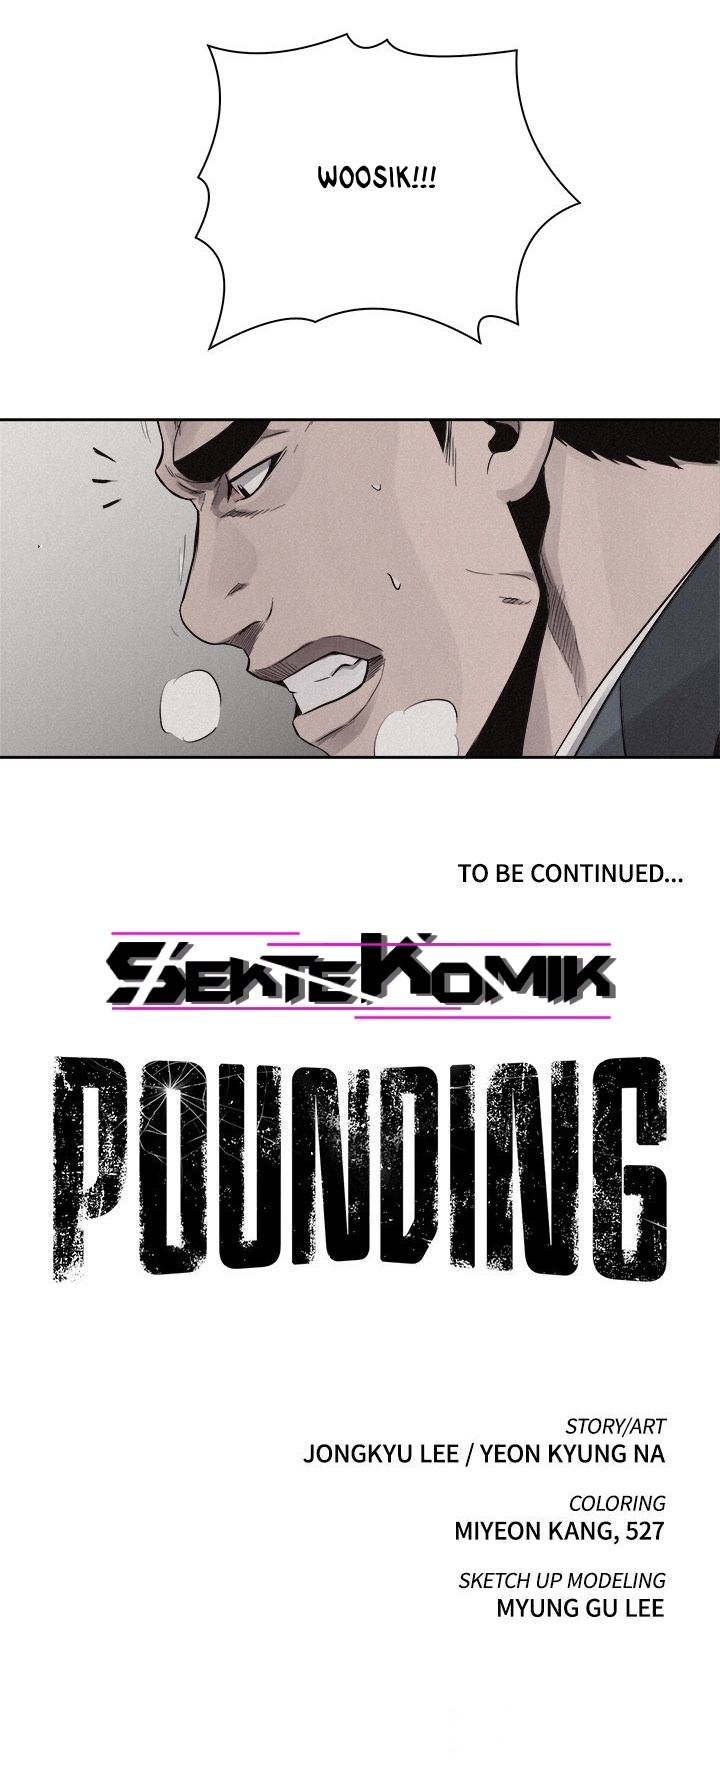 Pounding Chapter 43